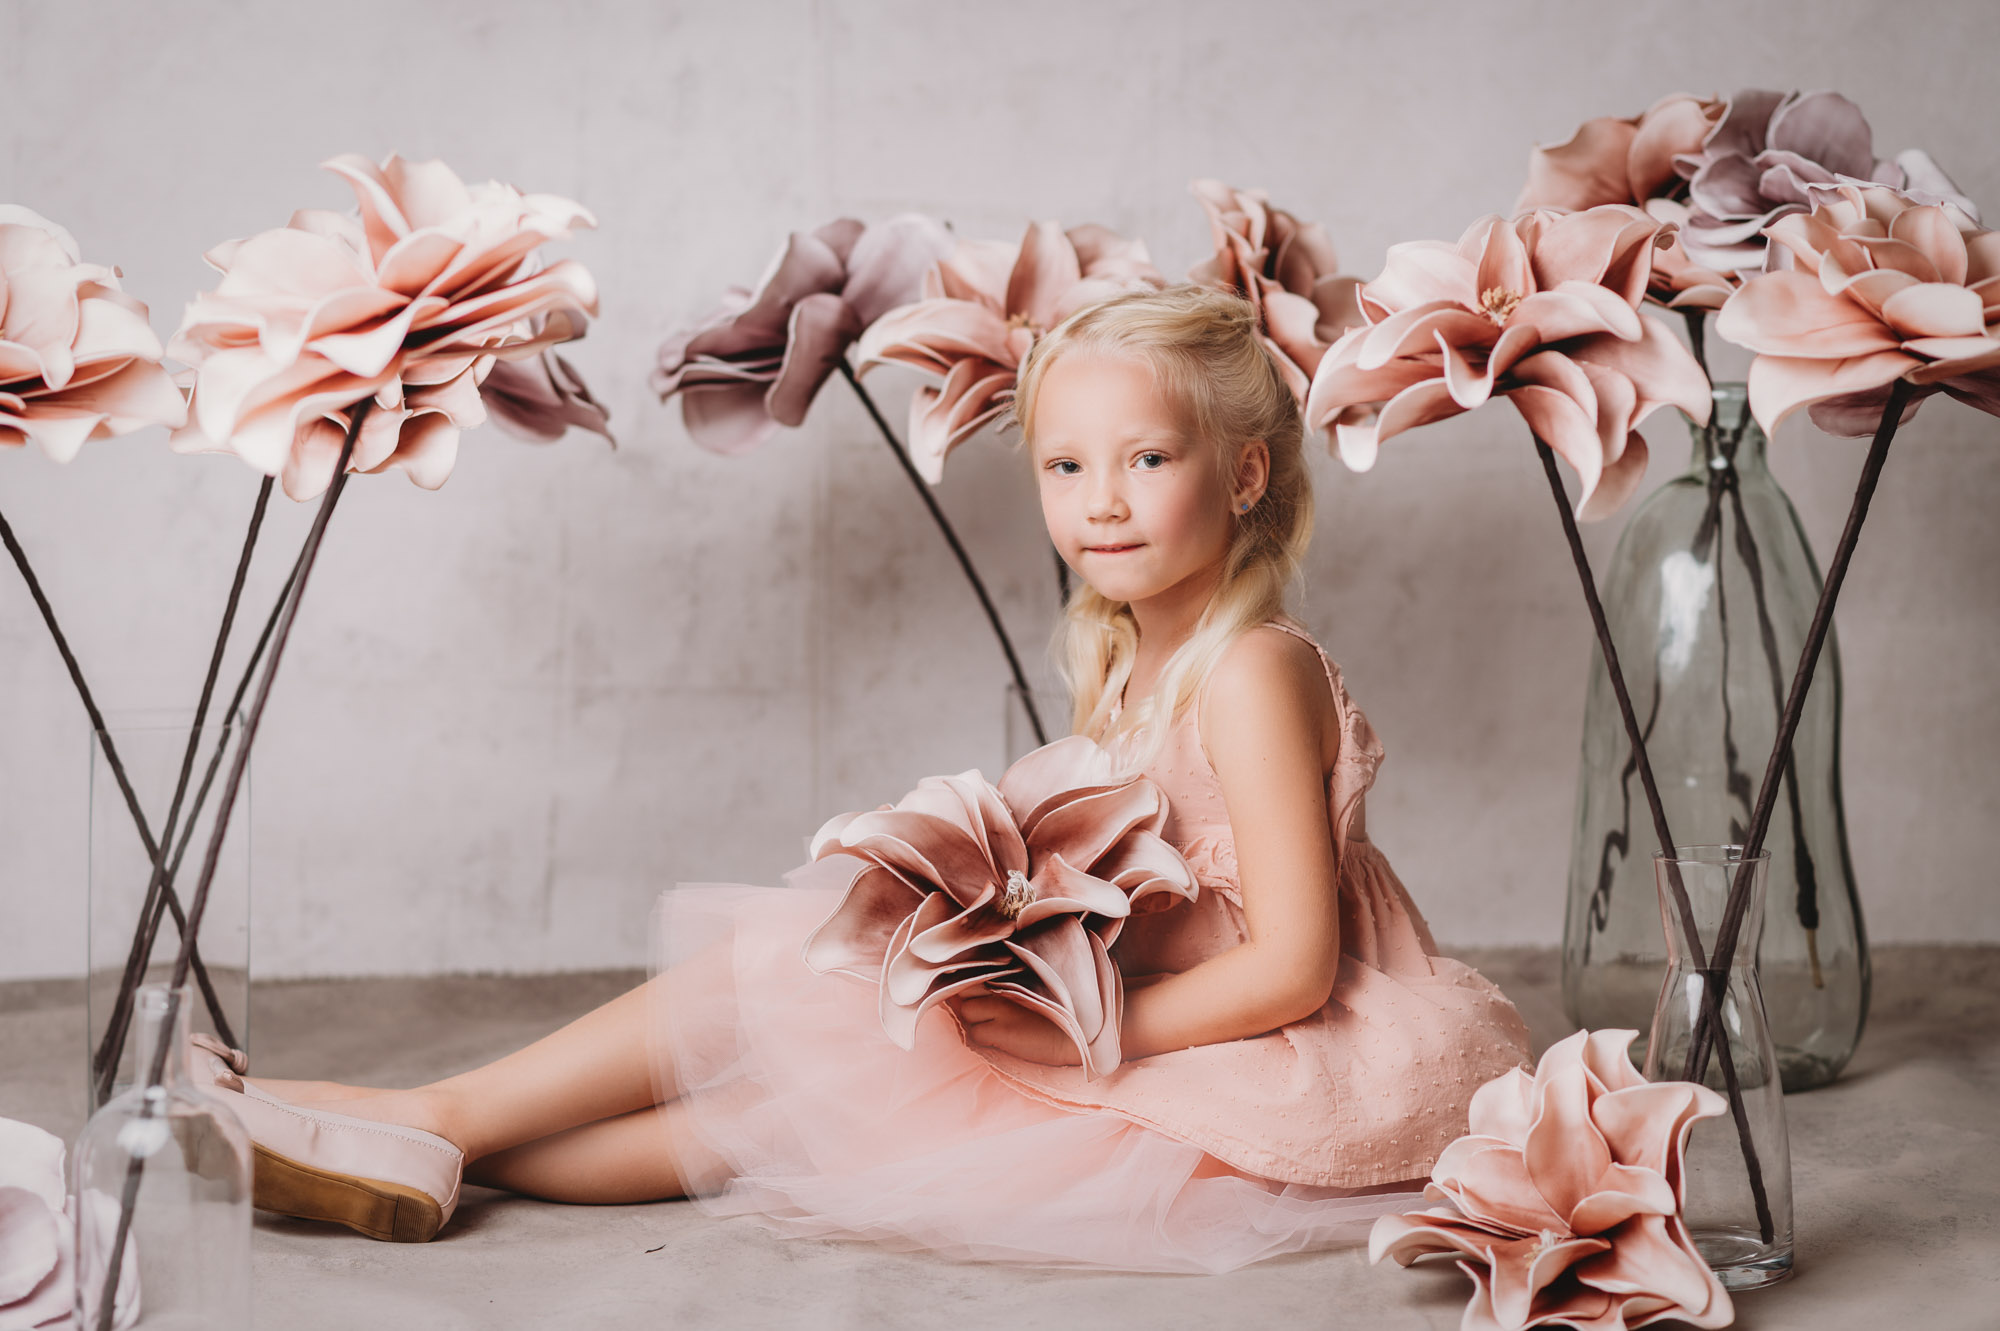 A little girl in a pink dress sitting on the ground with flowers, captured by a Sarasota photographer.